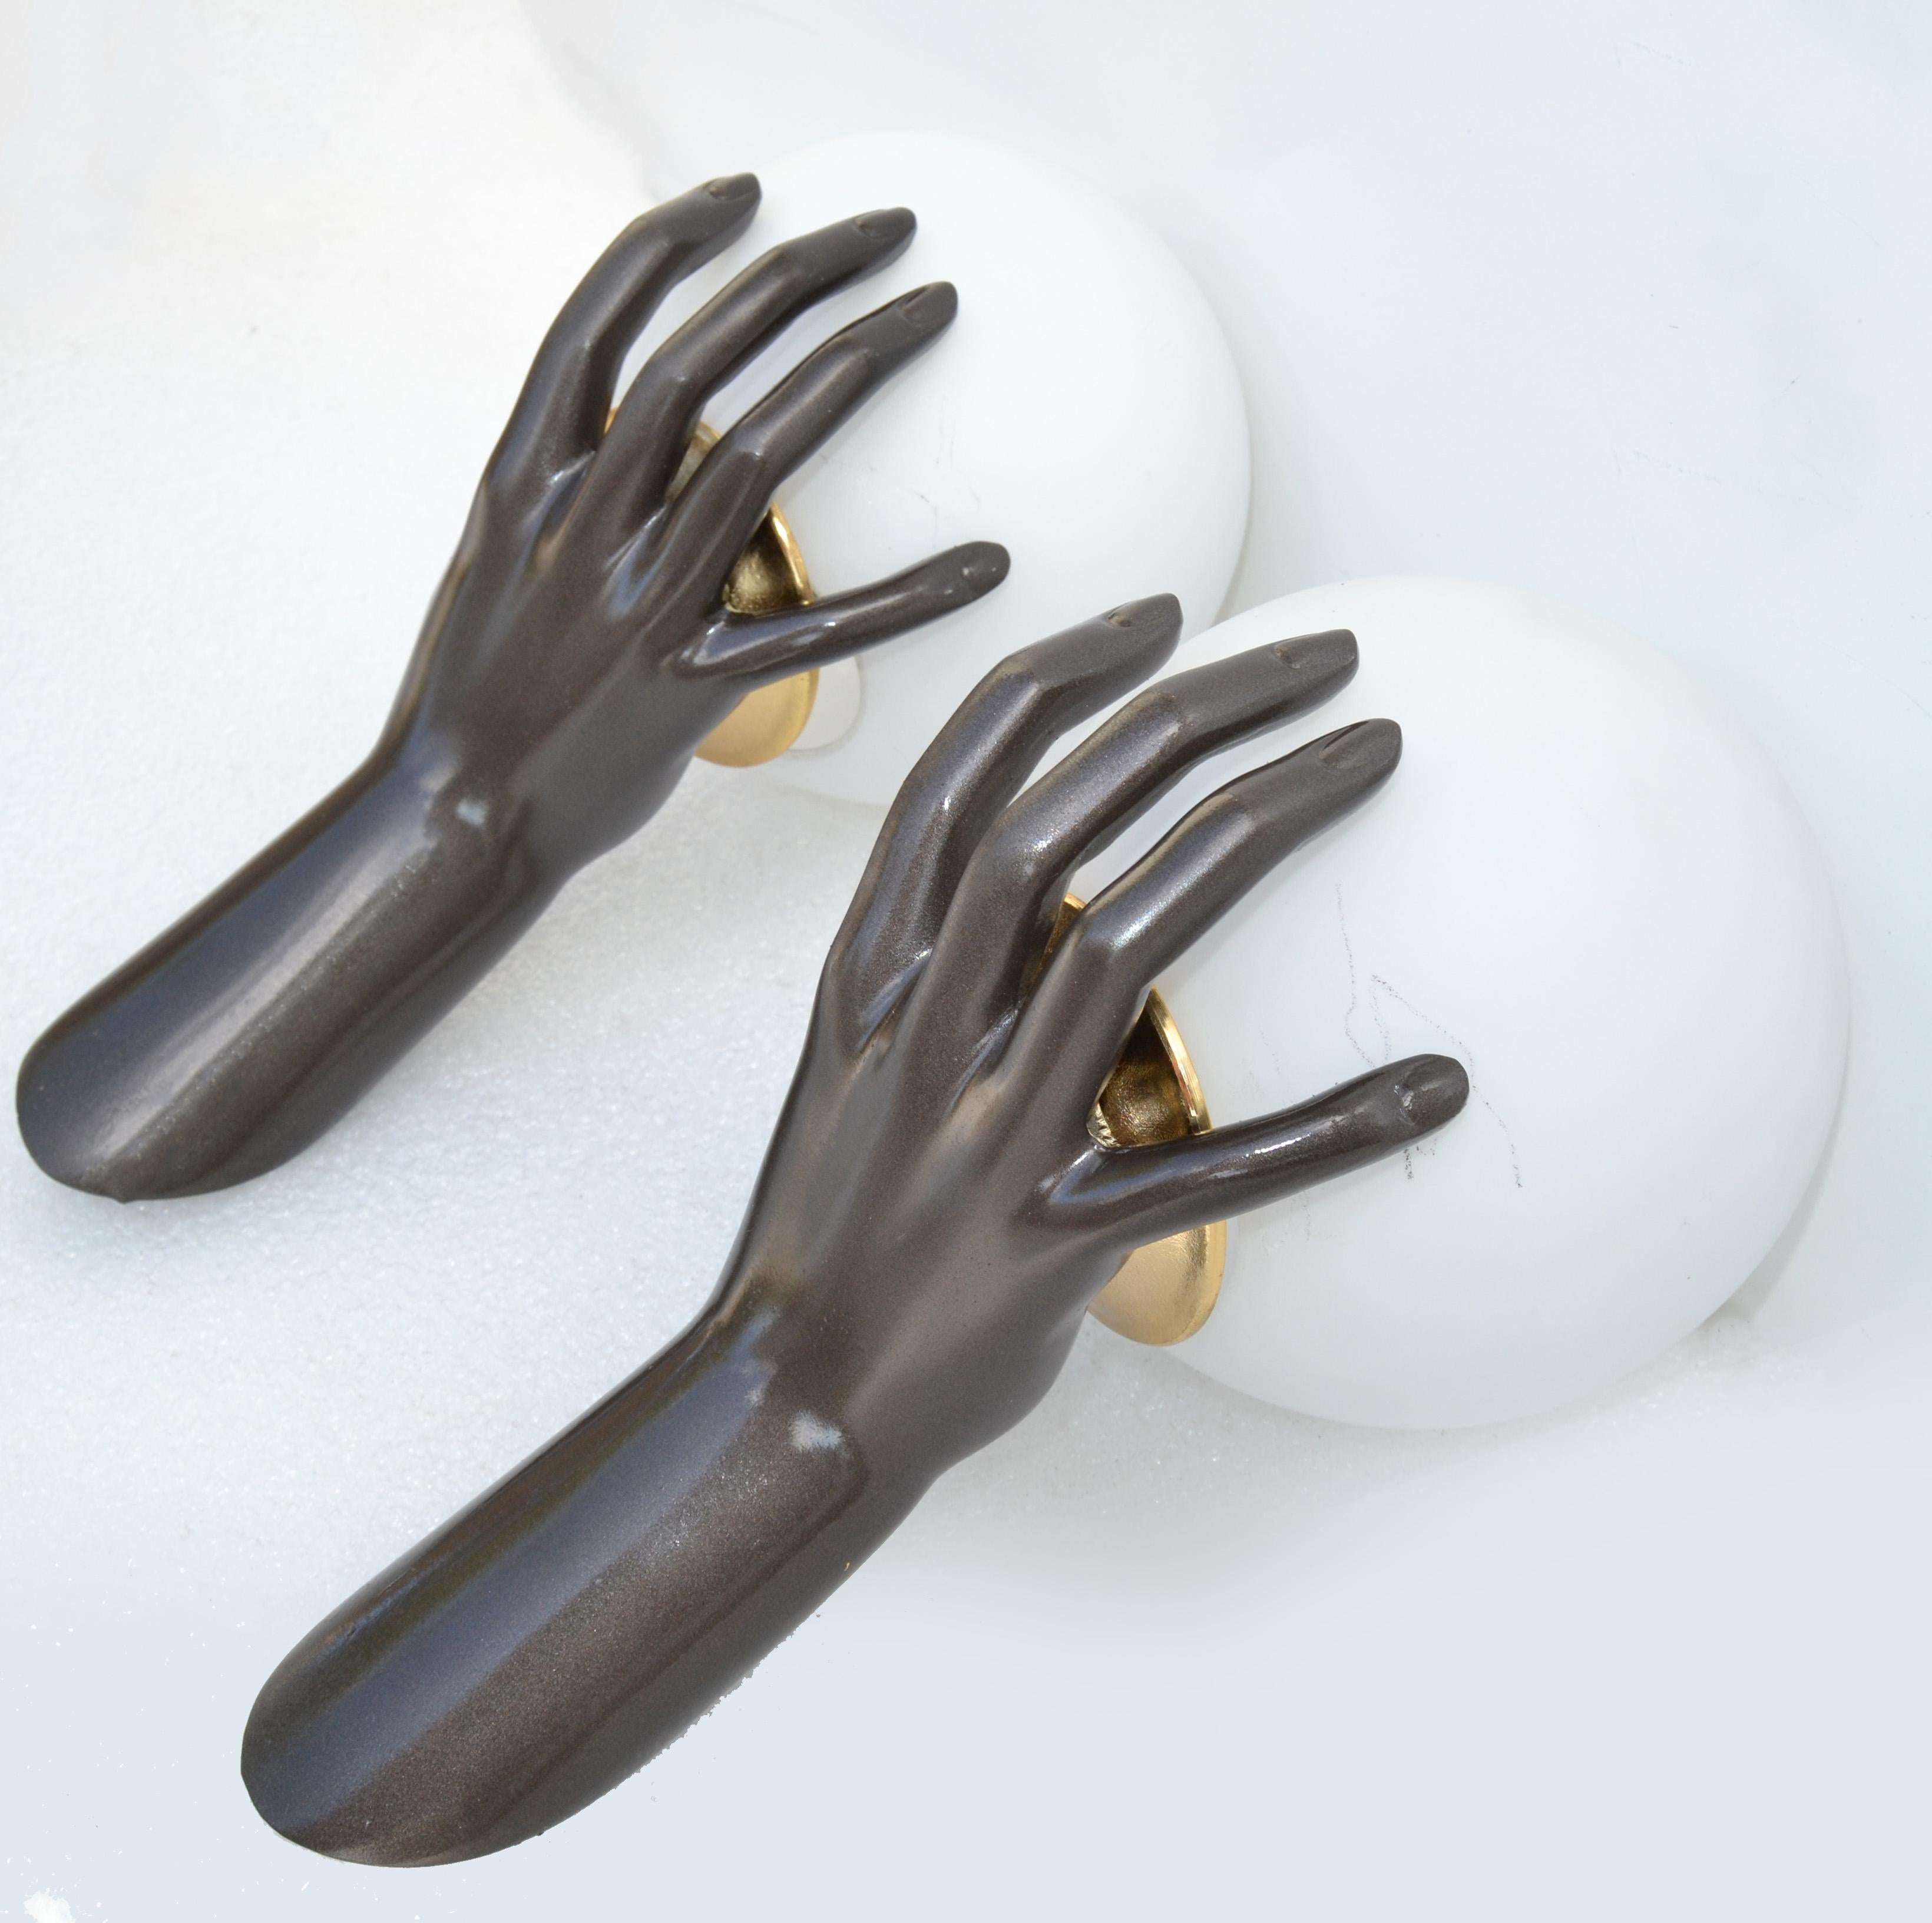 Superb bronze color pair of hands sconces by Maison Arlus. Model number 1436, figuring a bronze hand holding a lighted Opaline Globe.
US rewired and in working condition each hand takes one light bulb, 60 watts max. 
Measurement: round opaline